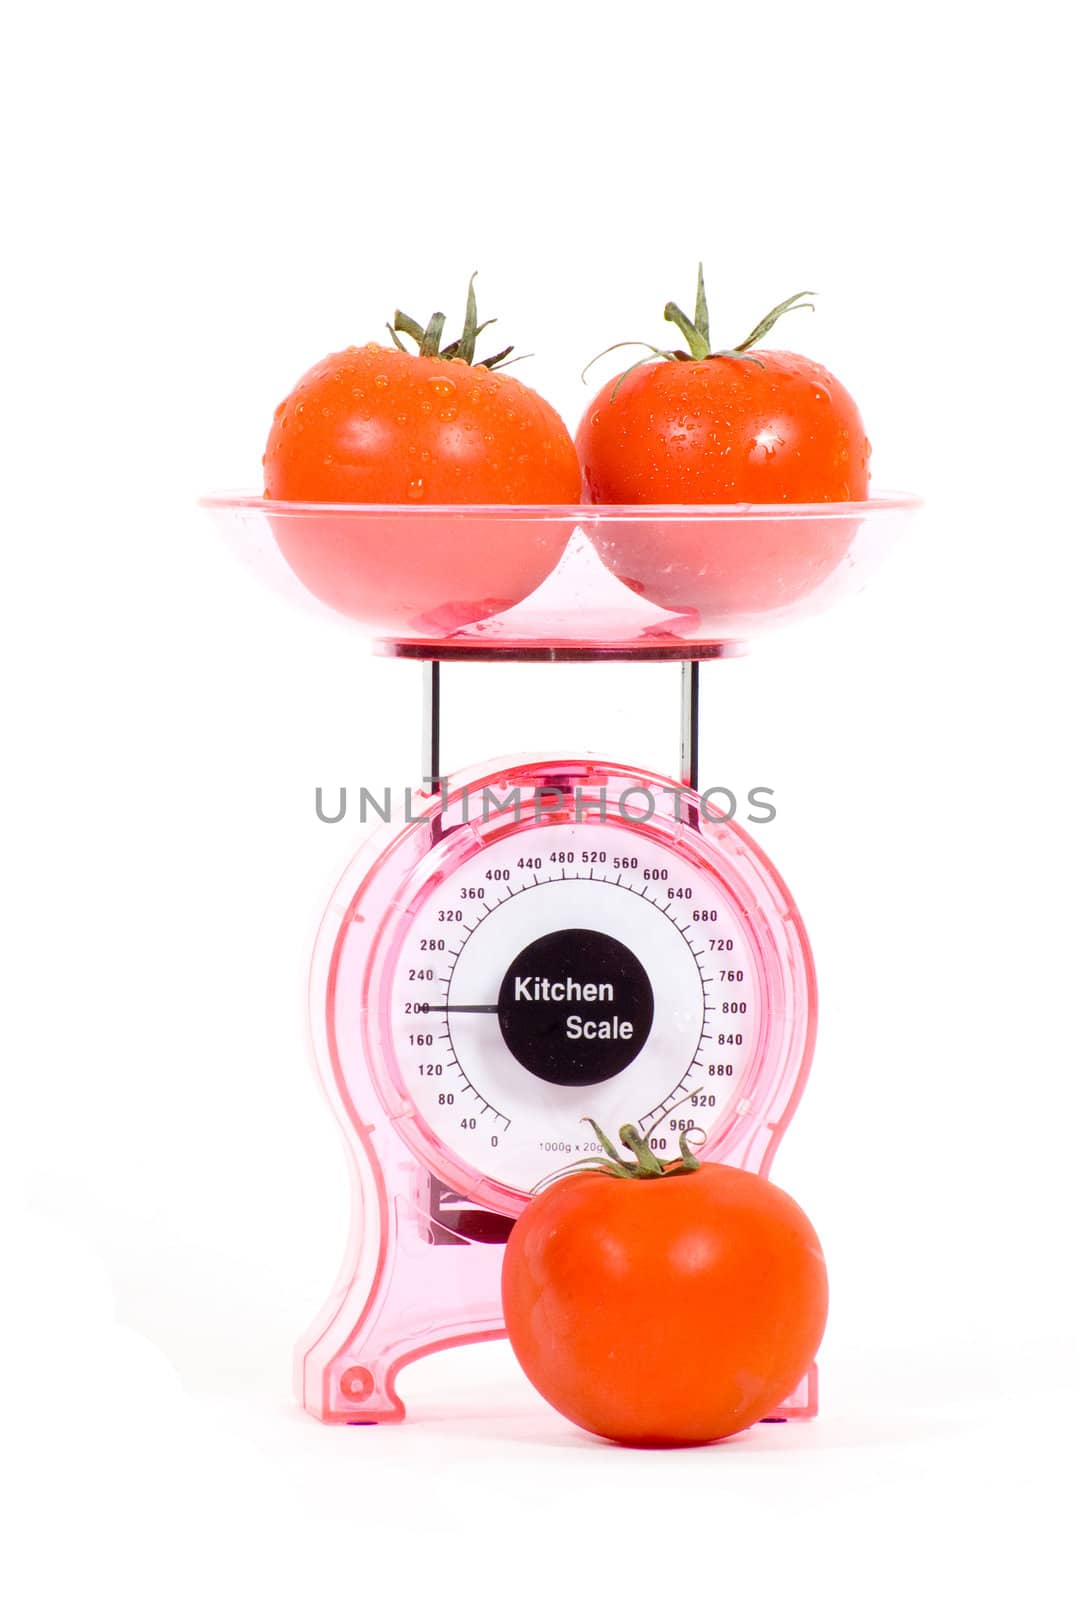 Kitchen Scales filled with tomatoes  isolated over white